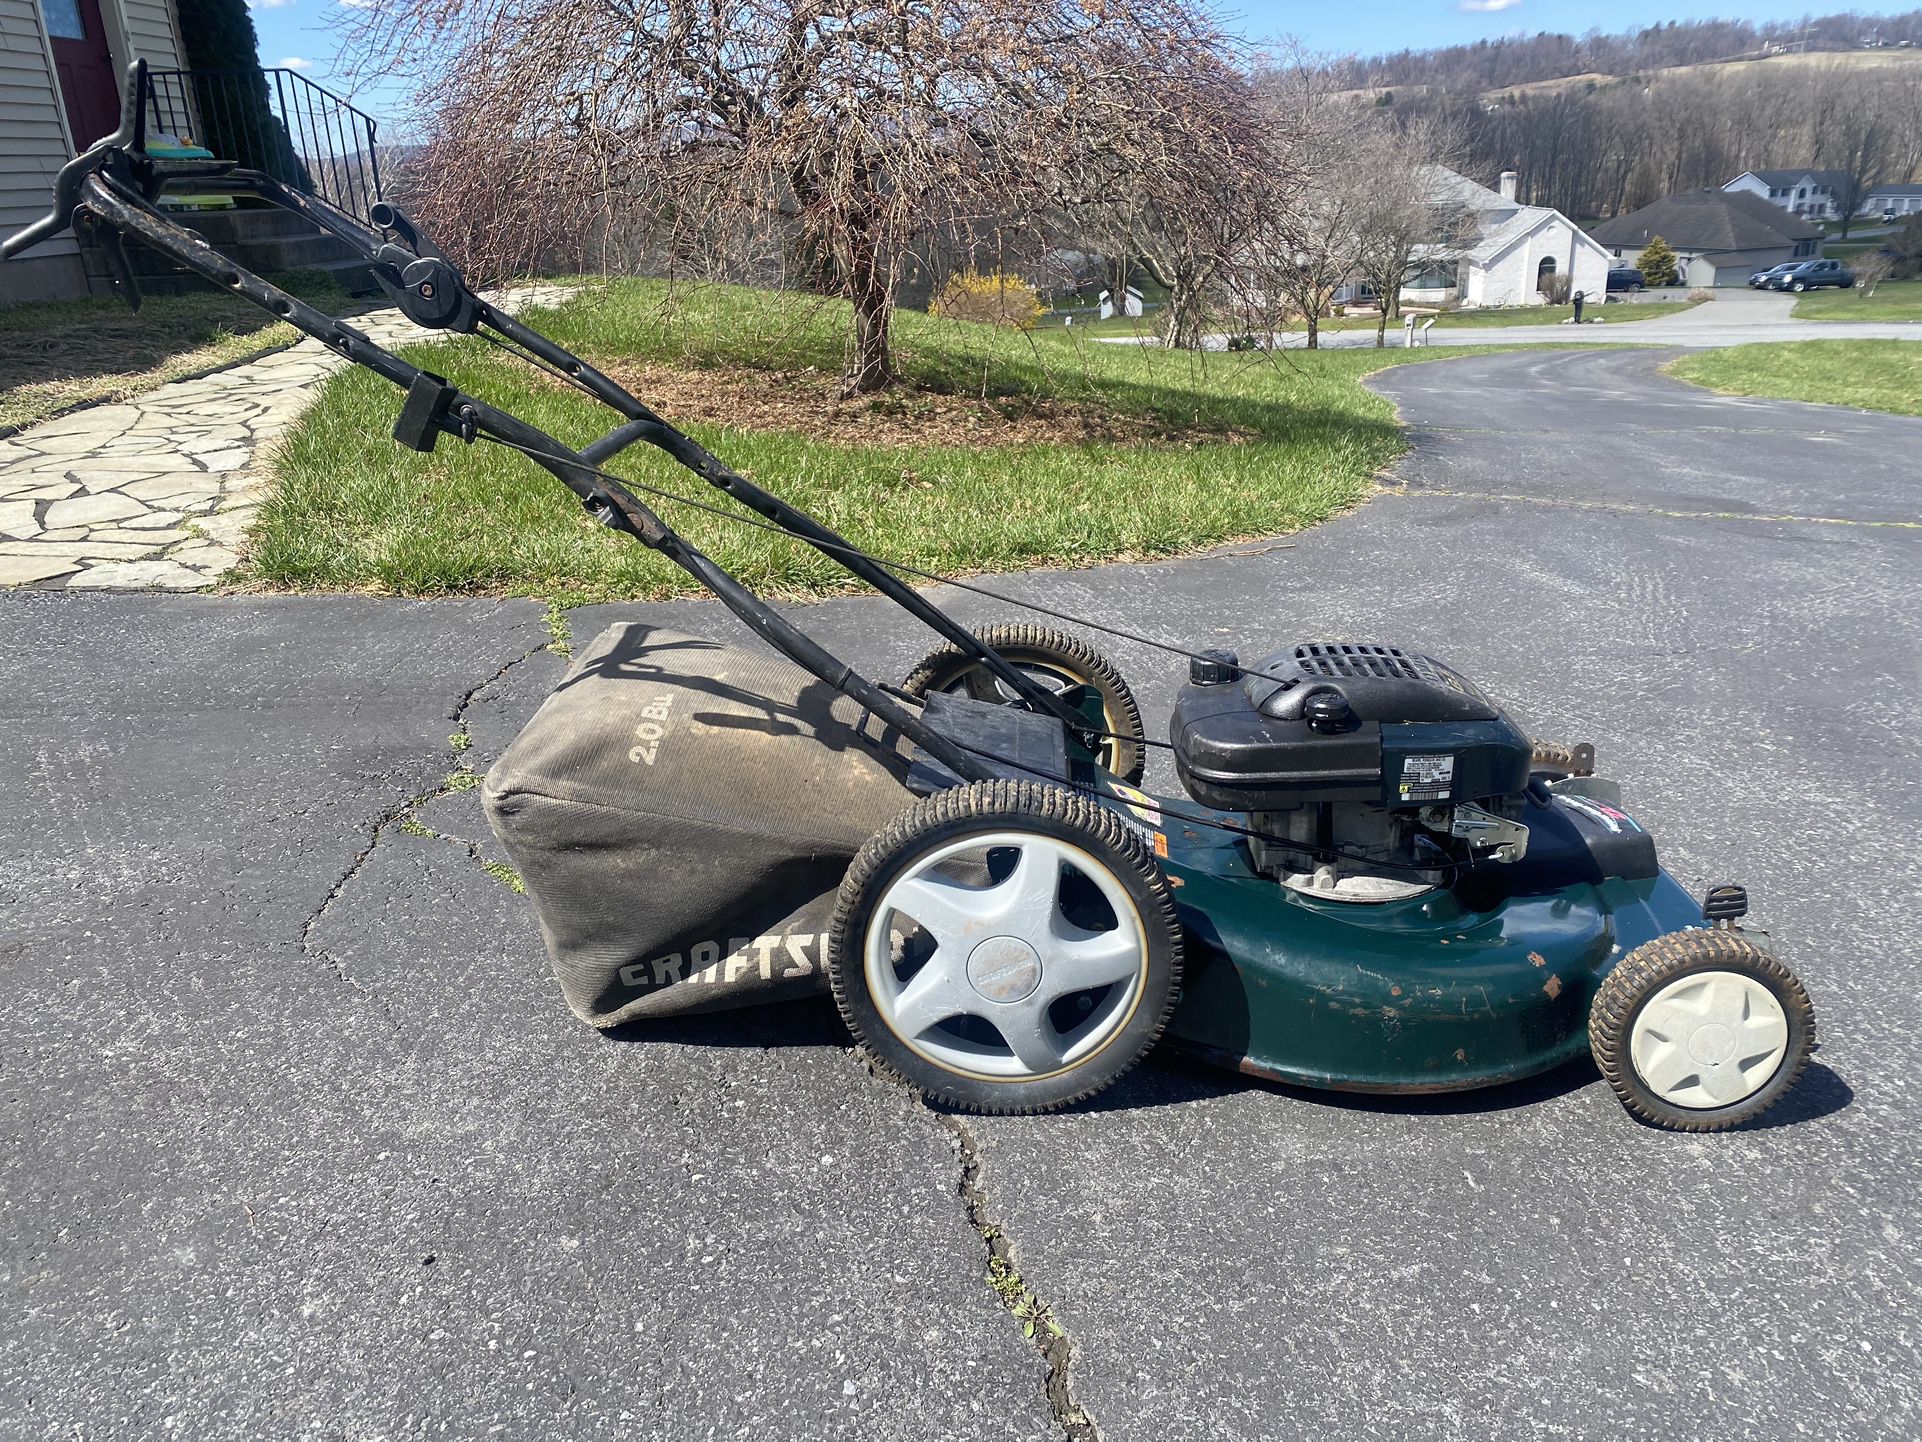 Craftsman Self Propelled Lawn Mower with Bagger